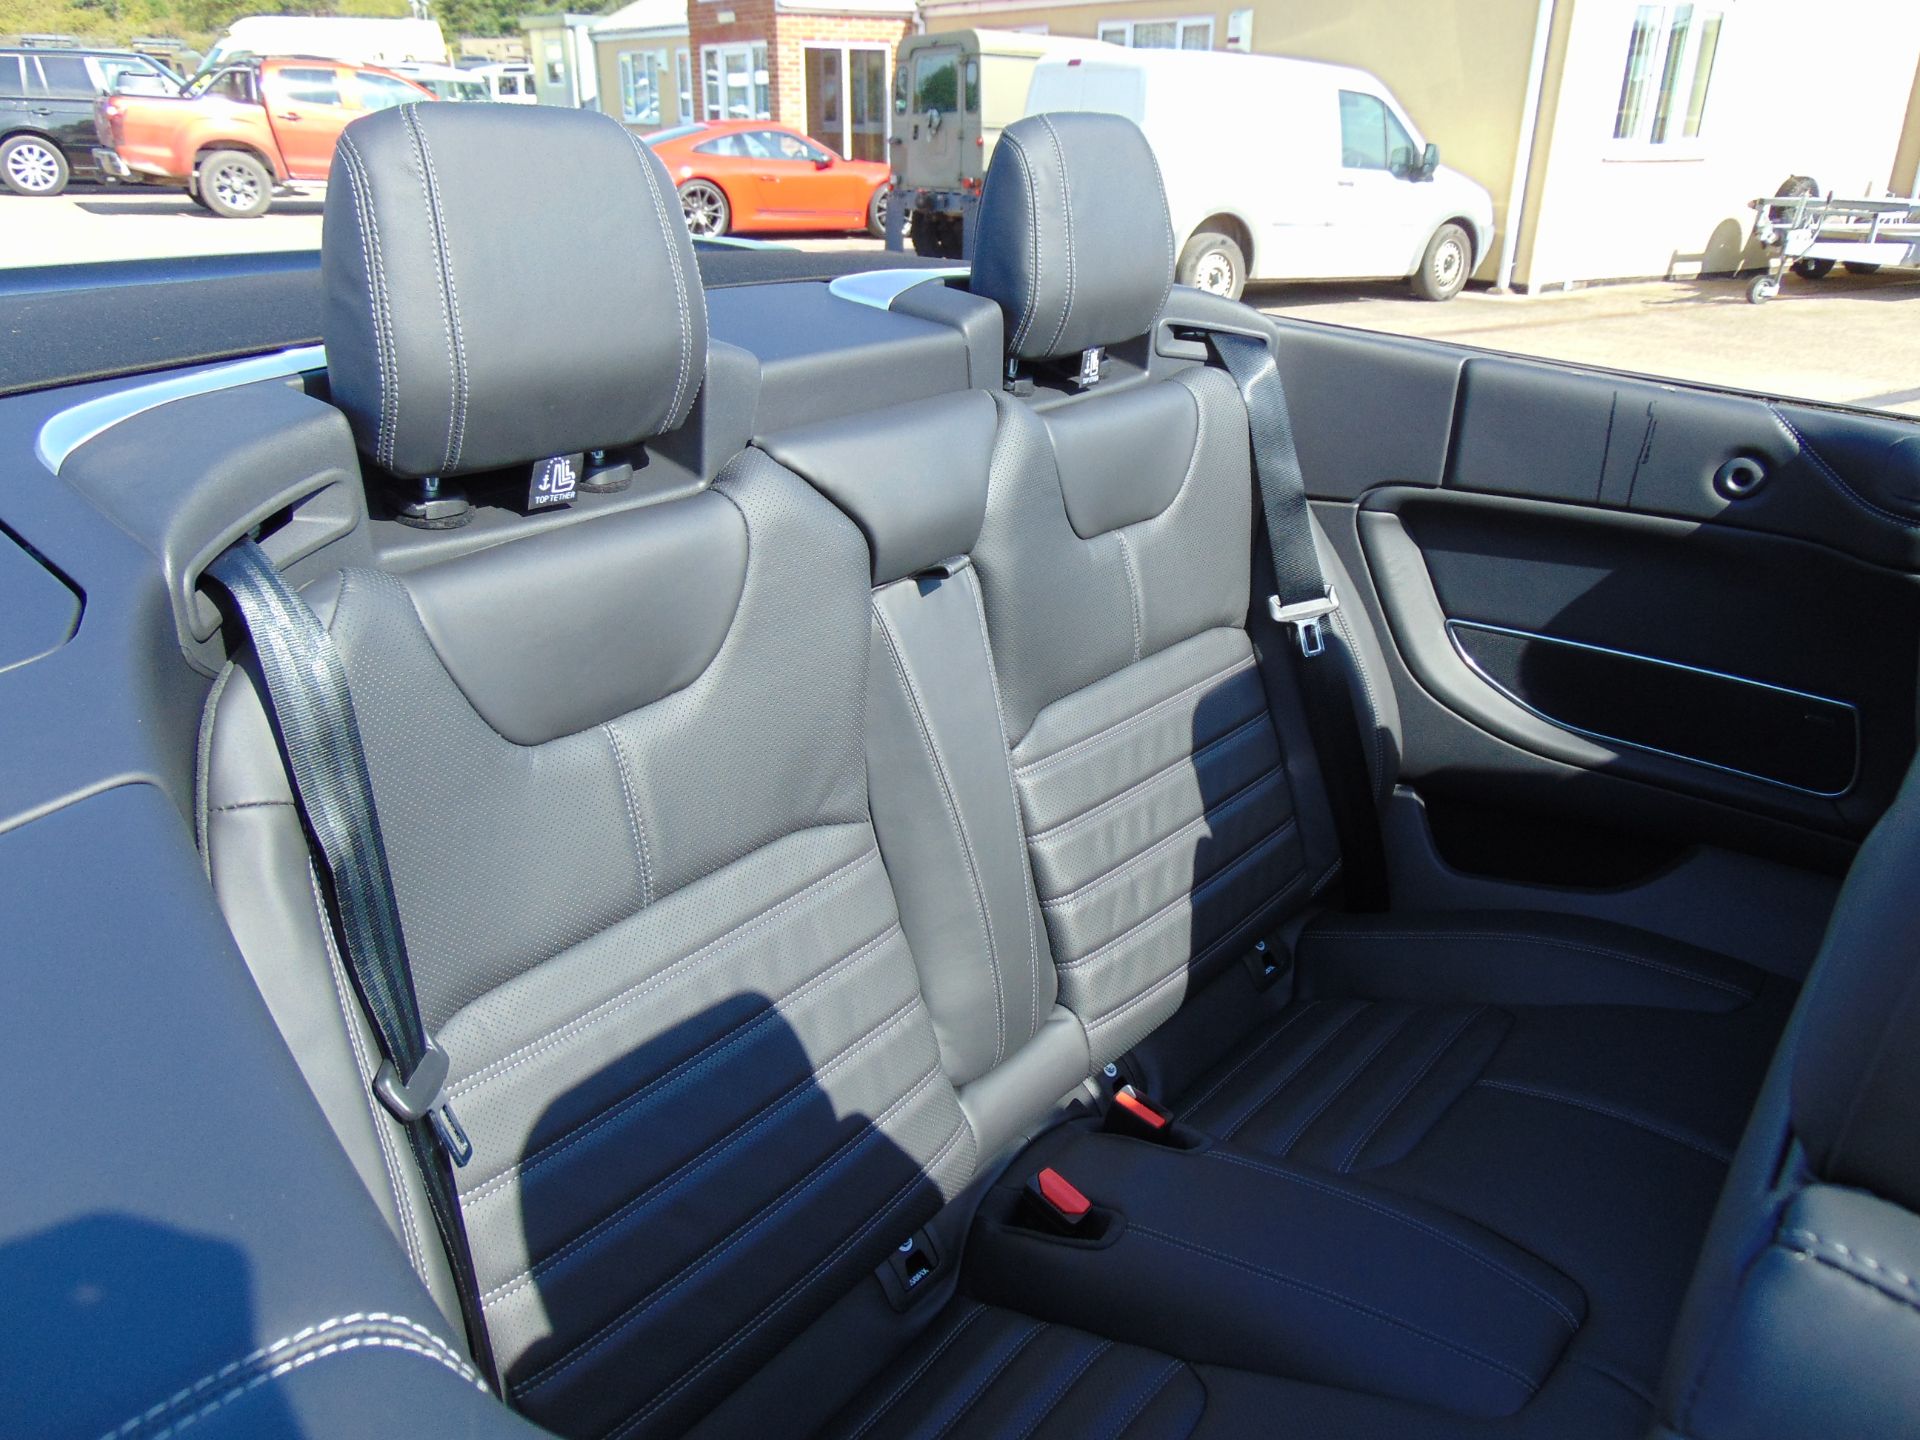 NEW UNUSED Range Rover Evoque 2.0 i4 HSE Dynamic Convertible - Image 36 of 39